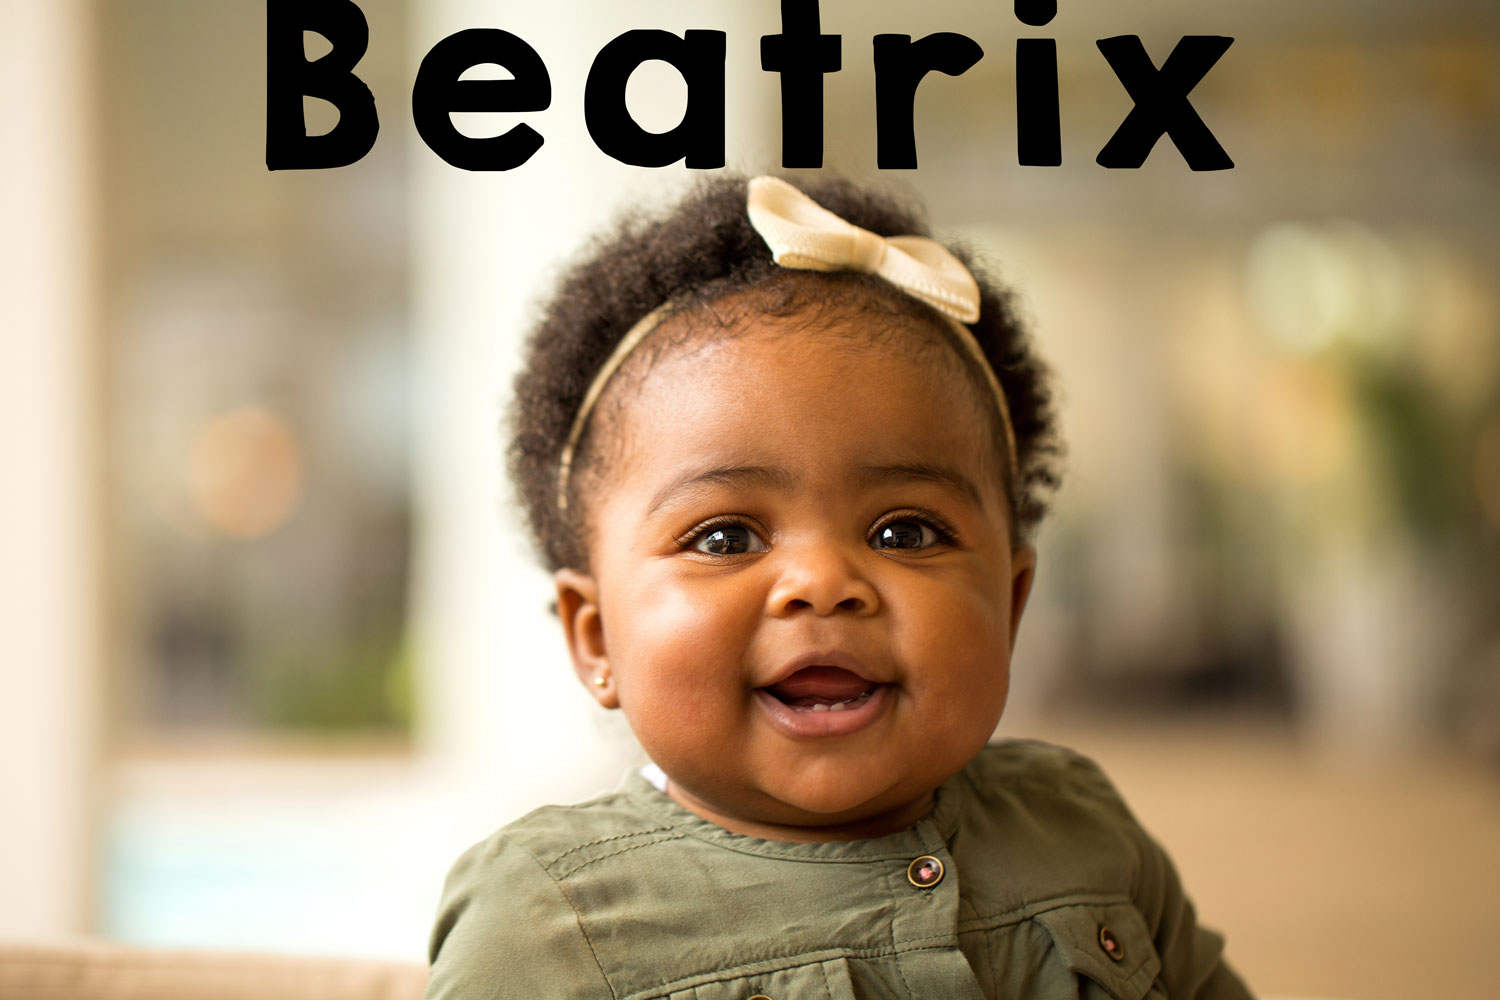 beatrix meaning